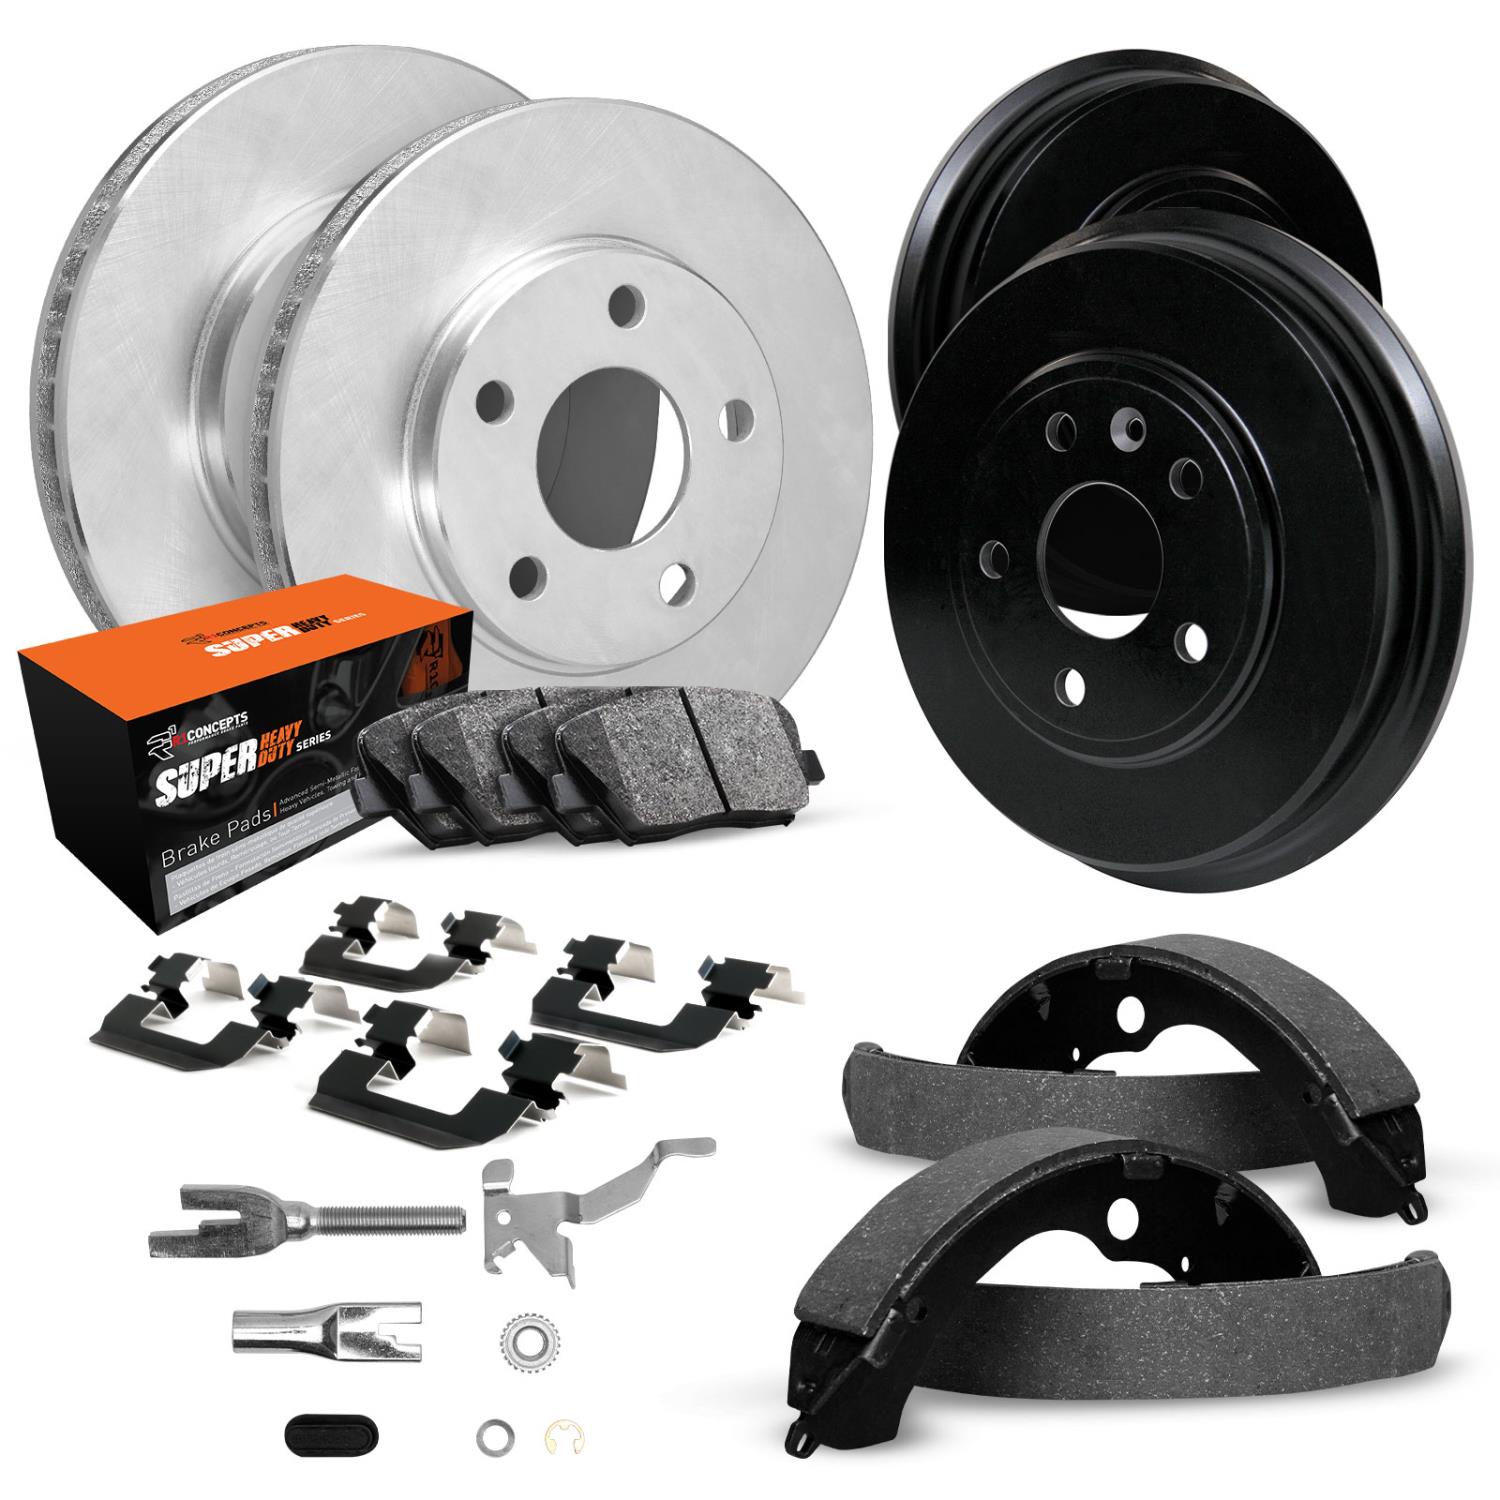 E-Line Blank Brake Rotor & Drum Set w/Super-Duty Pads, Shoes, Hardware, & Adjusters, 1983-1989 Ford/Lincoln/Mercury/Mazda